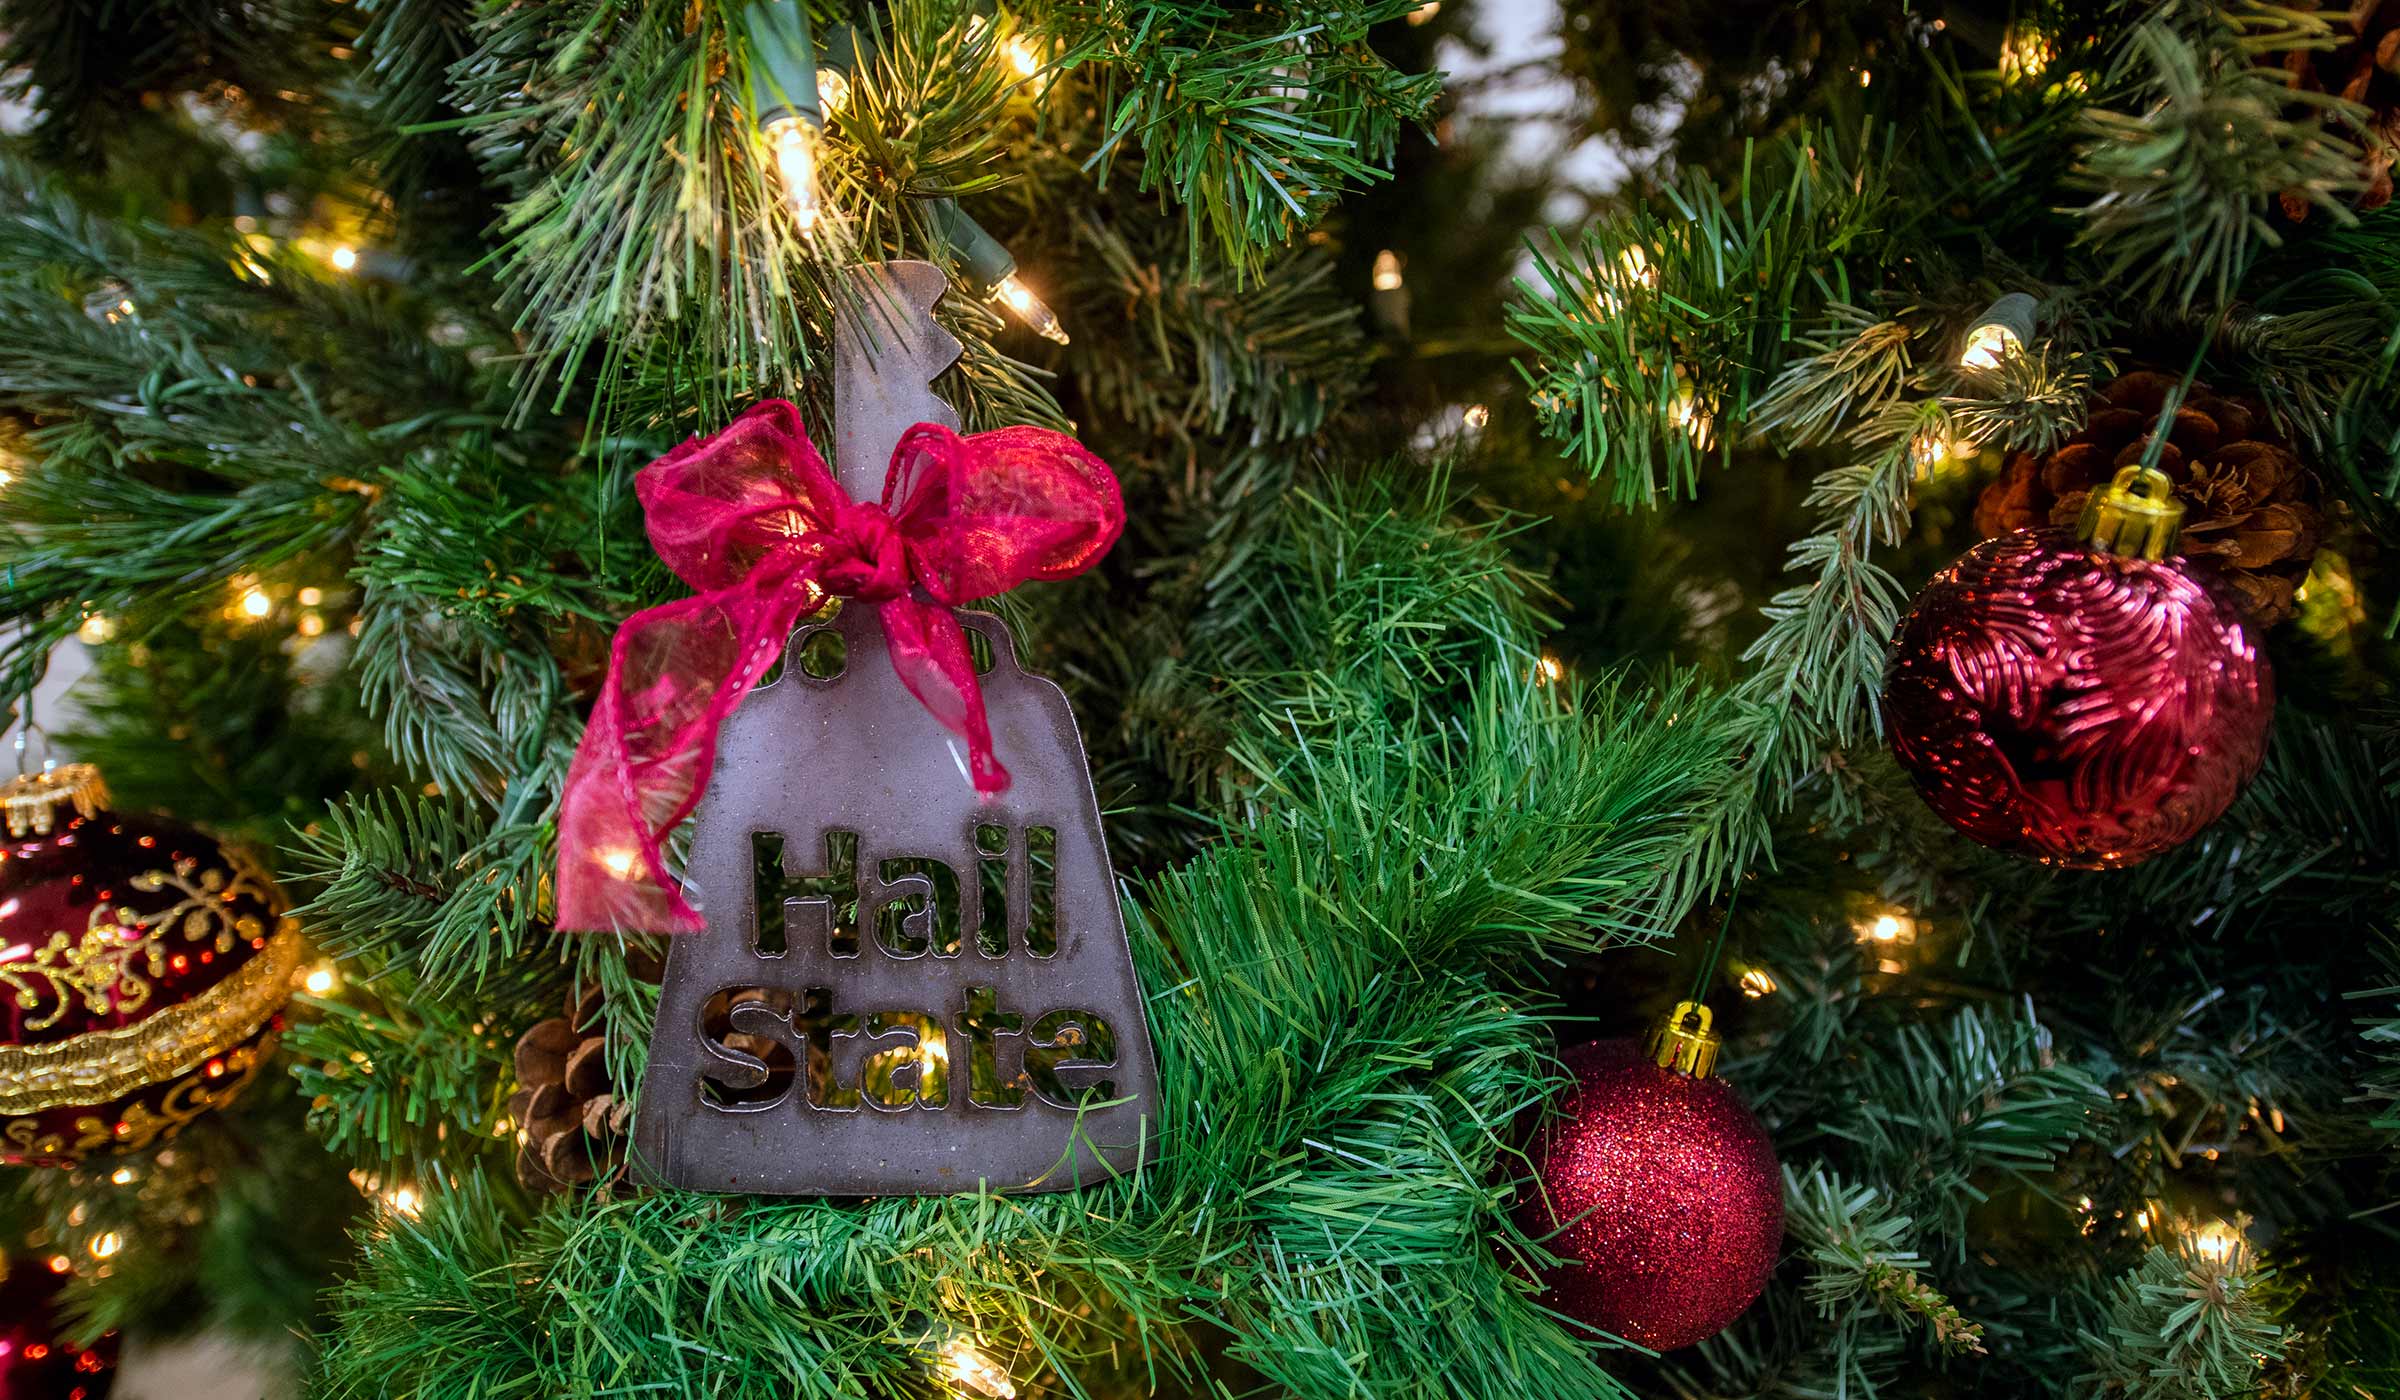 Sheet metal cowbell ornament with hail state on it with a maroon ribbon on Christmas tree